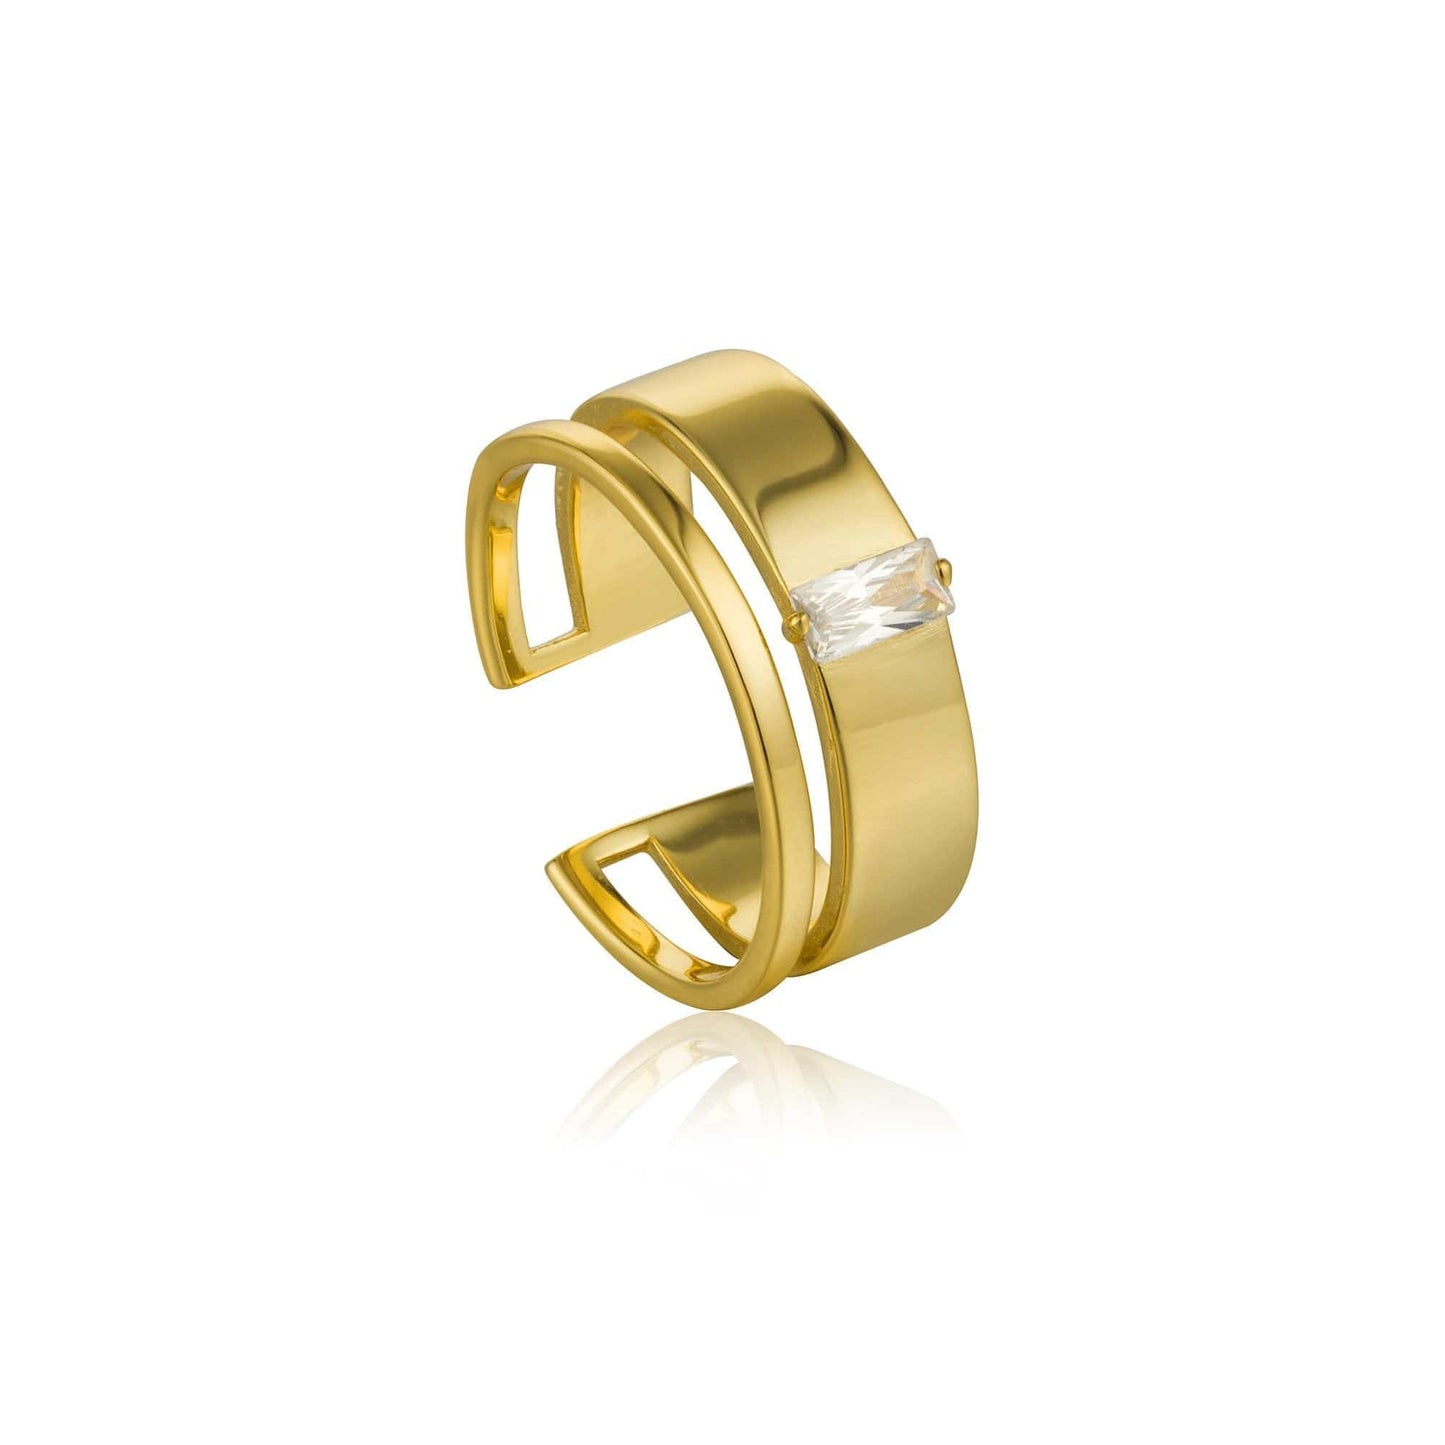 RNG-GPL Gold Glow Wide Adjustable Ring